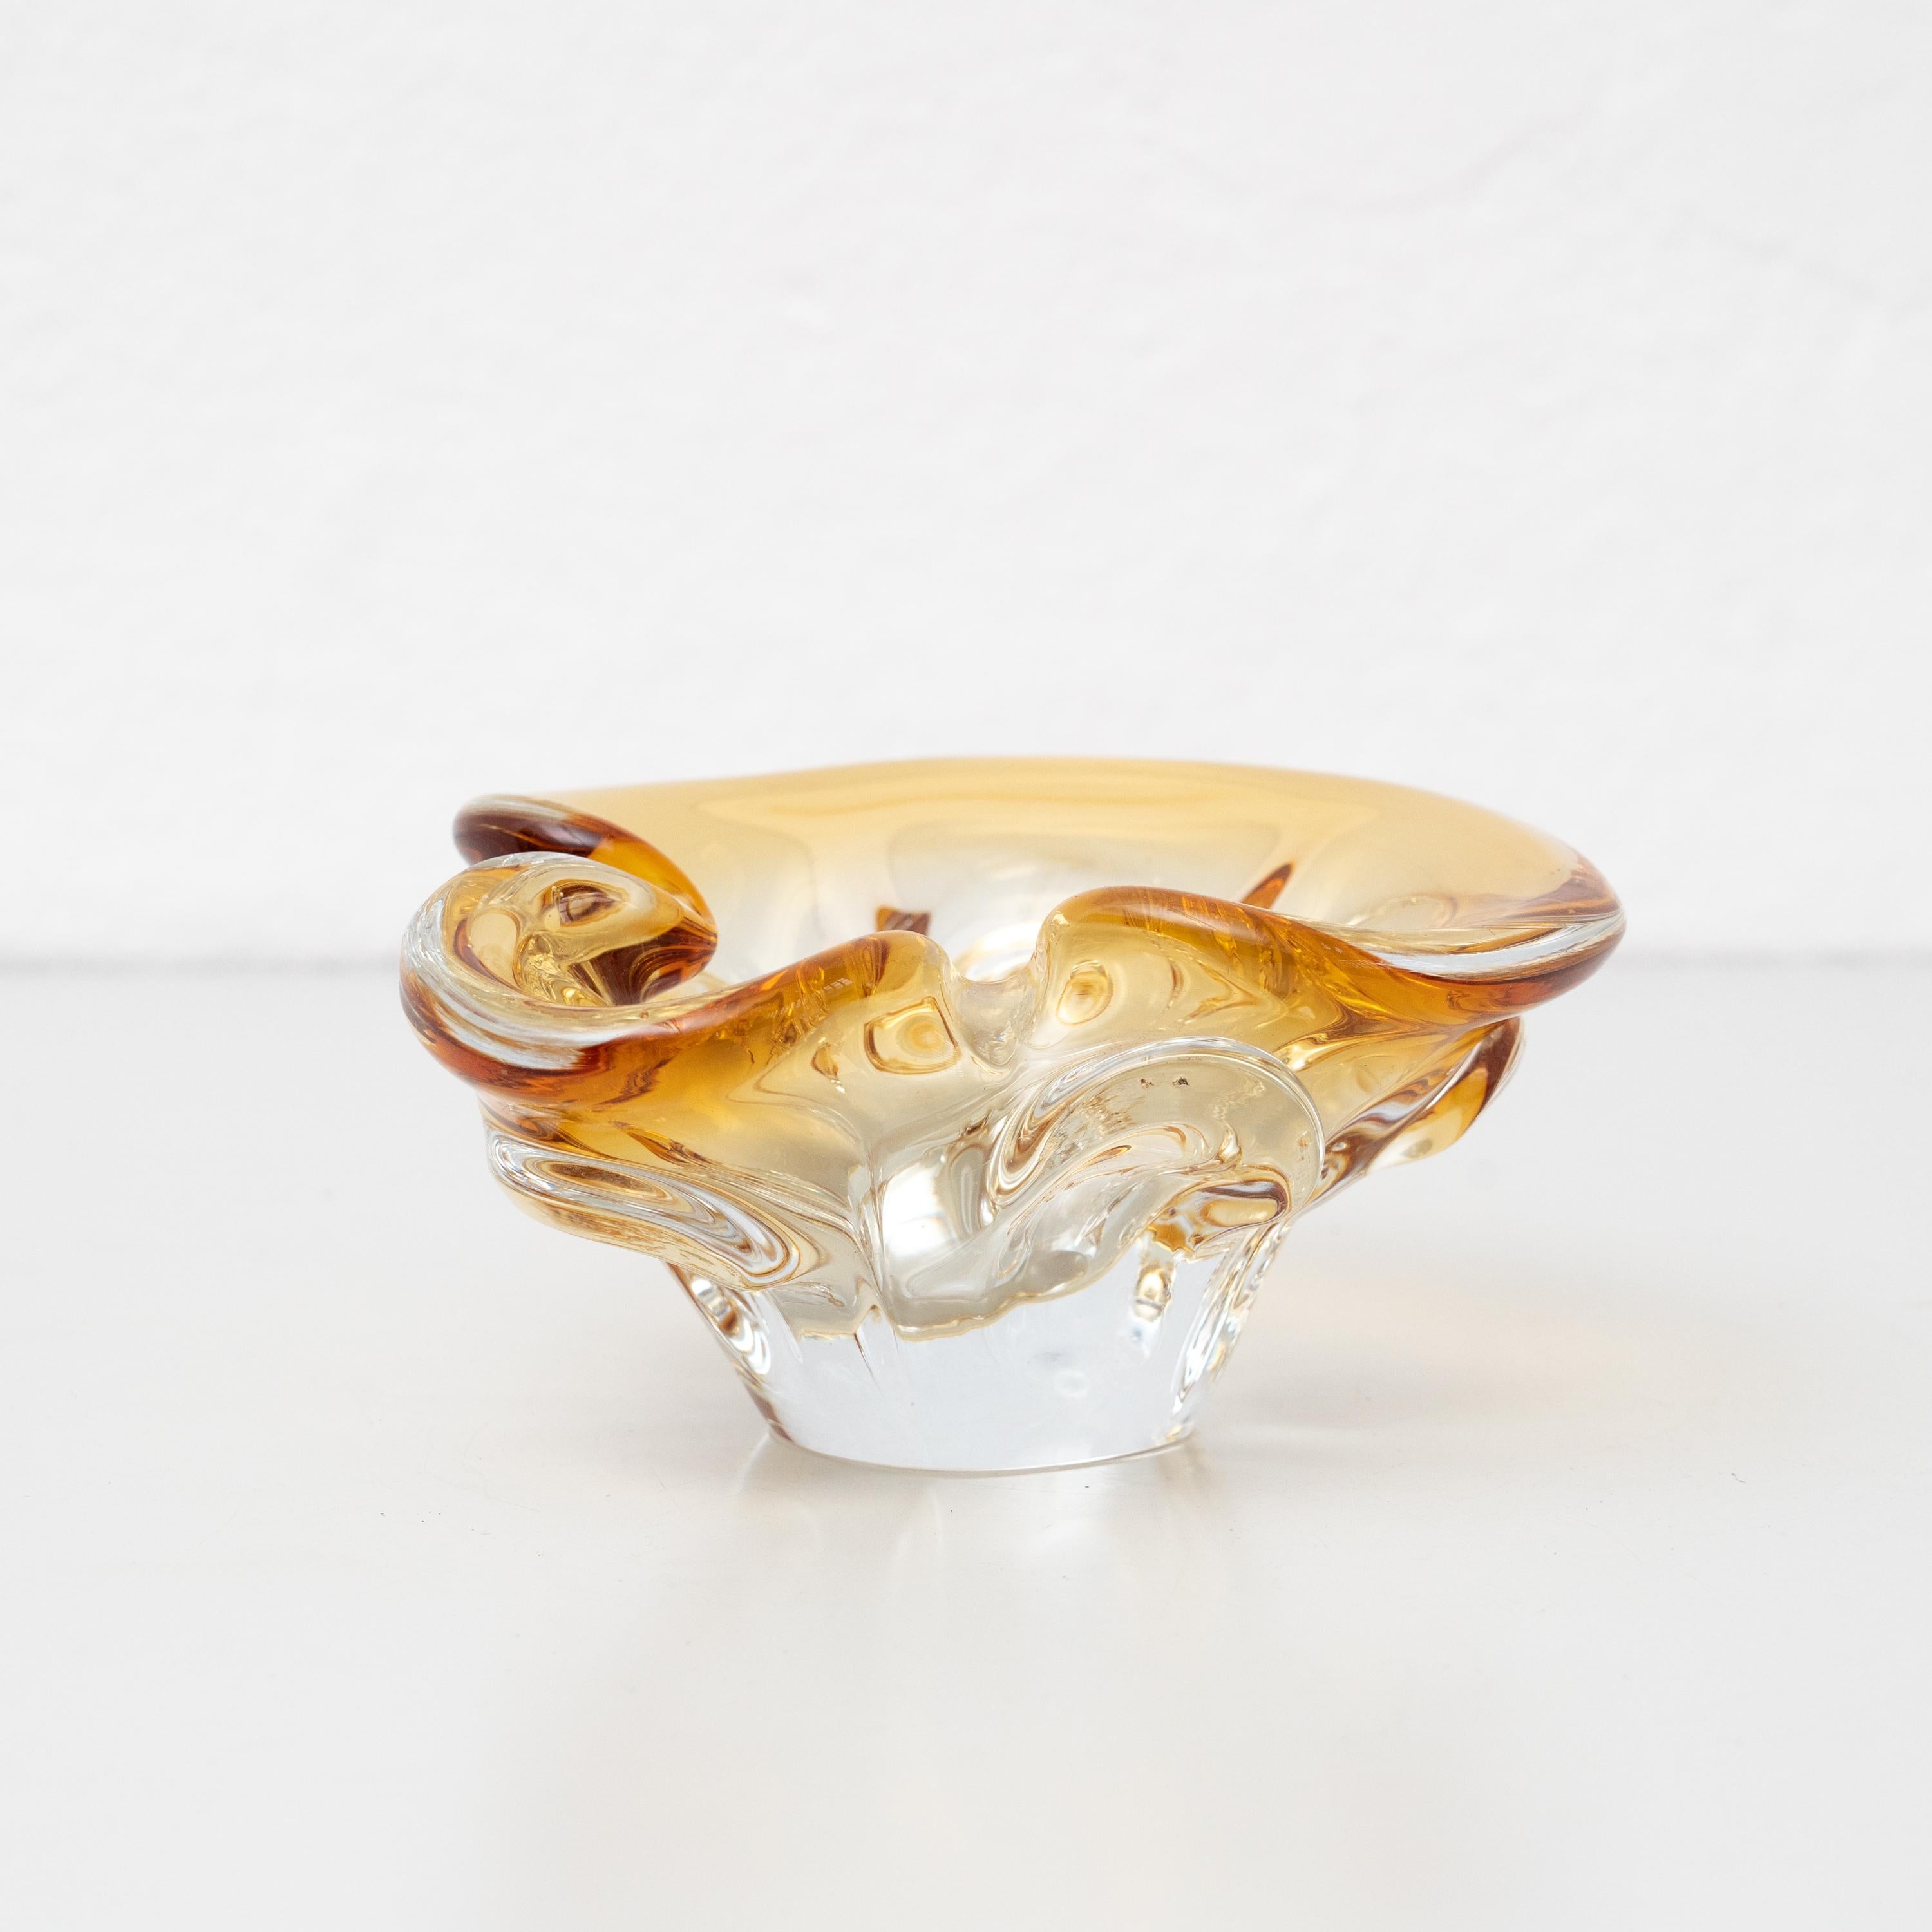 Murano glass ashtray, circa 1970.
Manufactured in Italy.

In original condition, with minor wear consistent of age and use, preserving a beautiful patina.

Materials:
Glass.